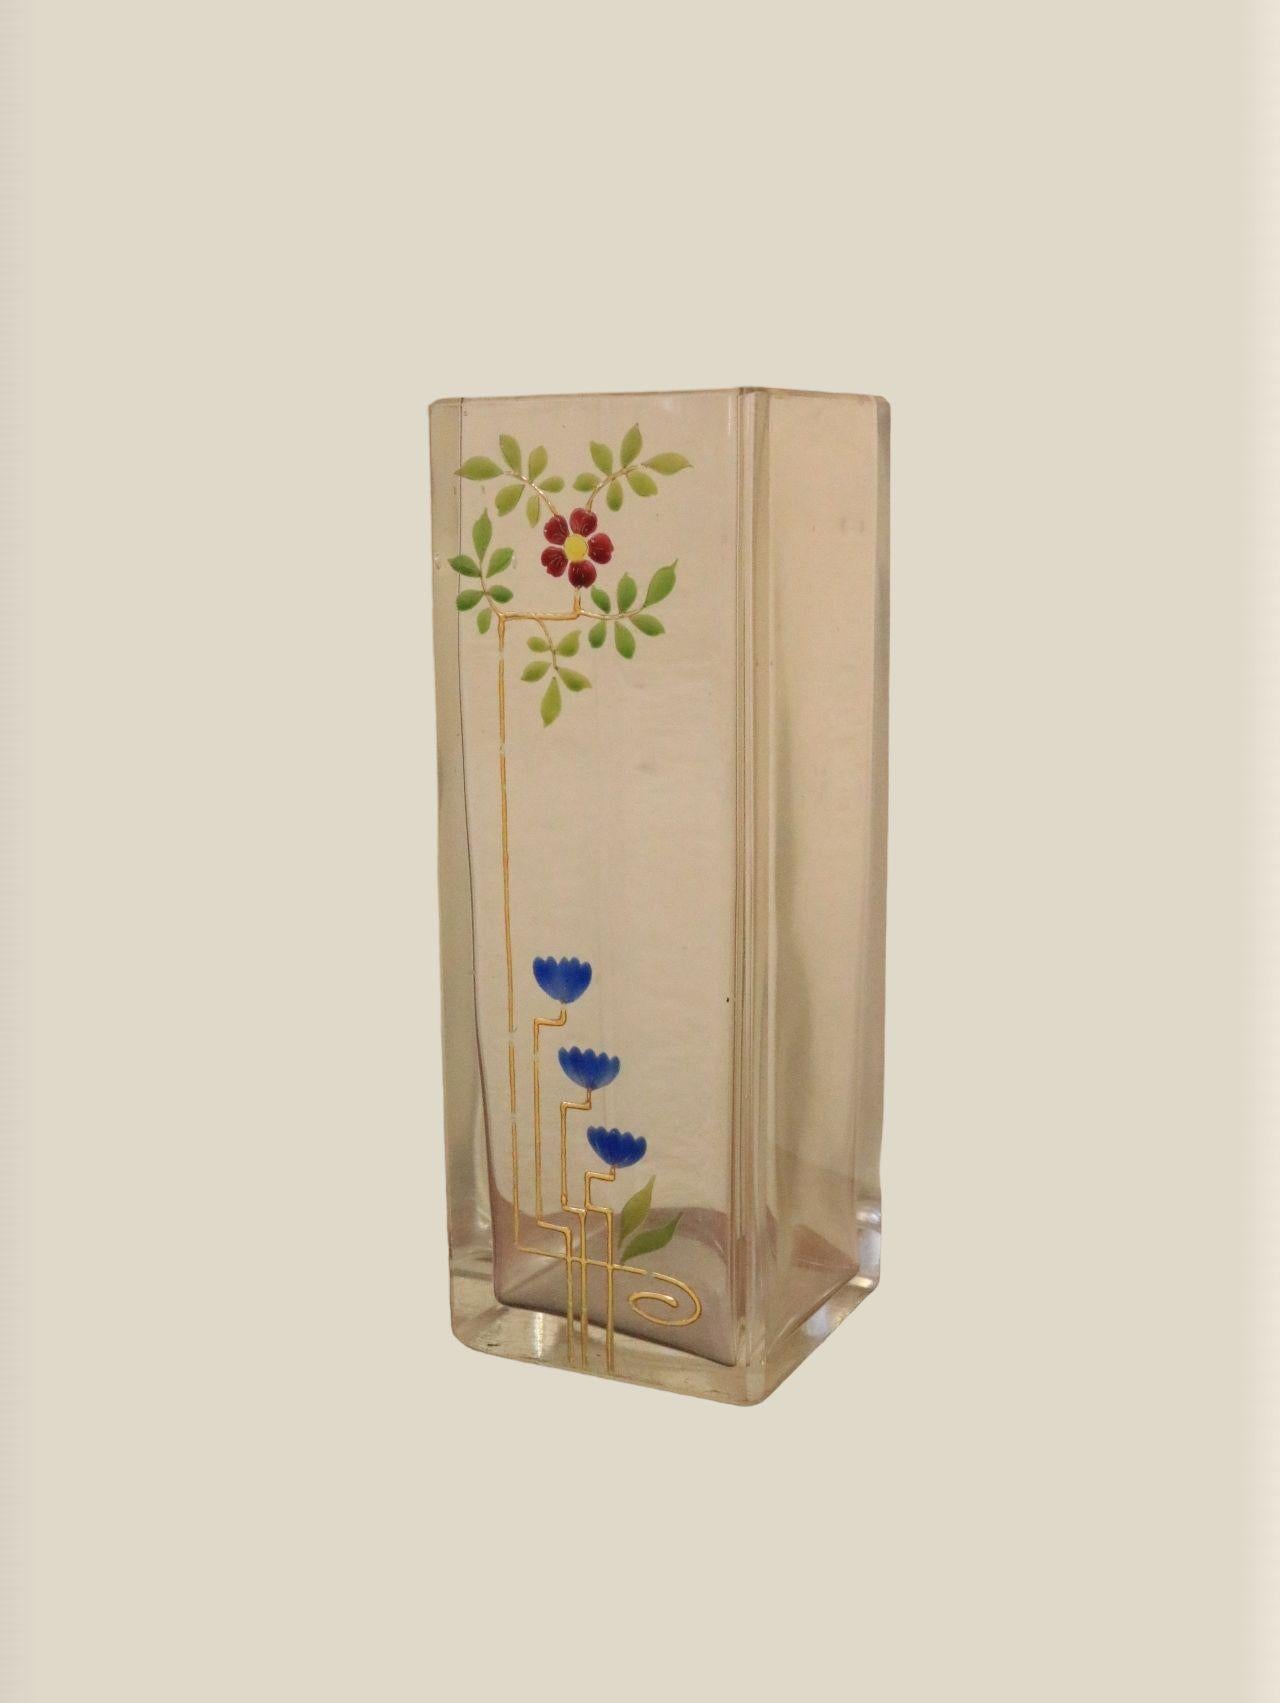 Very beautiful, original art nouveau glass vase.
From Josef Riedel, Polaun.

From a private art nouveau collection.
Well preserved, with light gold rubbing on the top rim.

Height: 15 cm / 5.9 inch
Width: 5,3 cm / 2.09 inch.